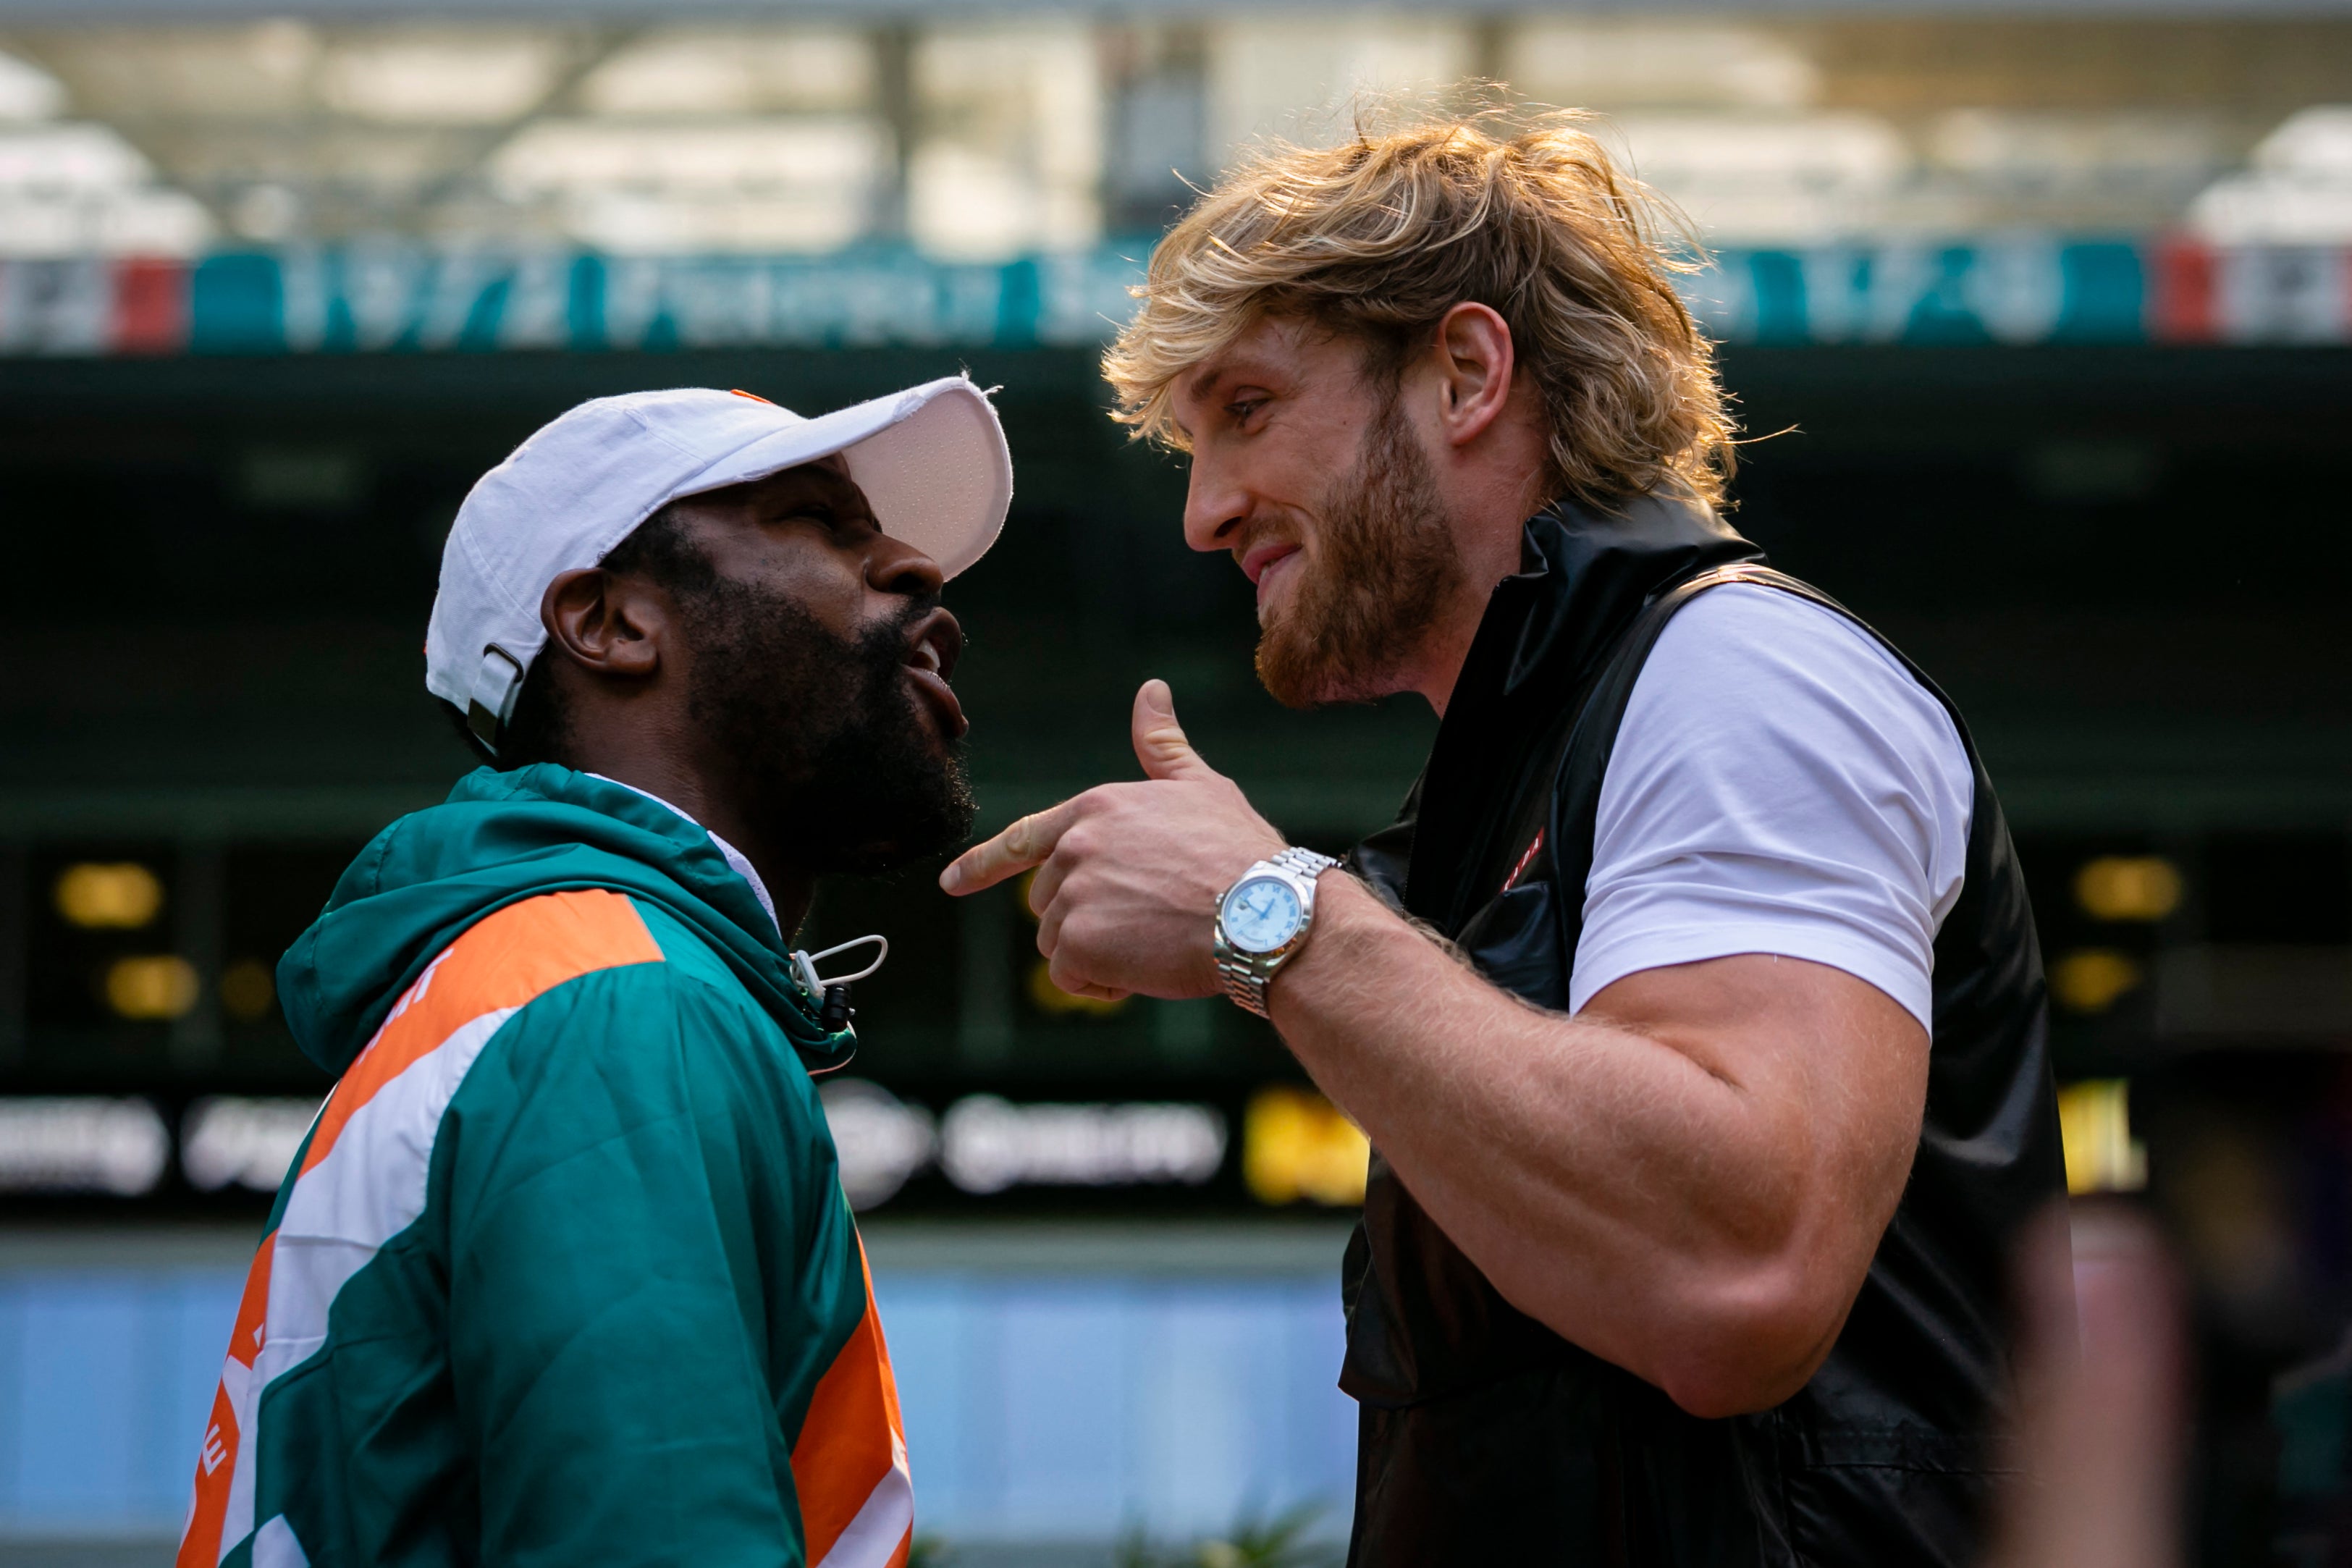 Floyd Mayweather and Logan Paul square up at a recent promotional event